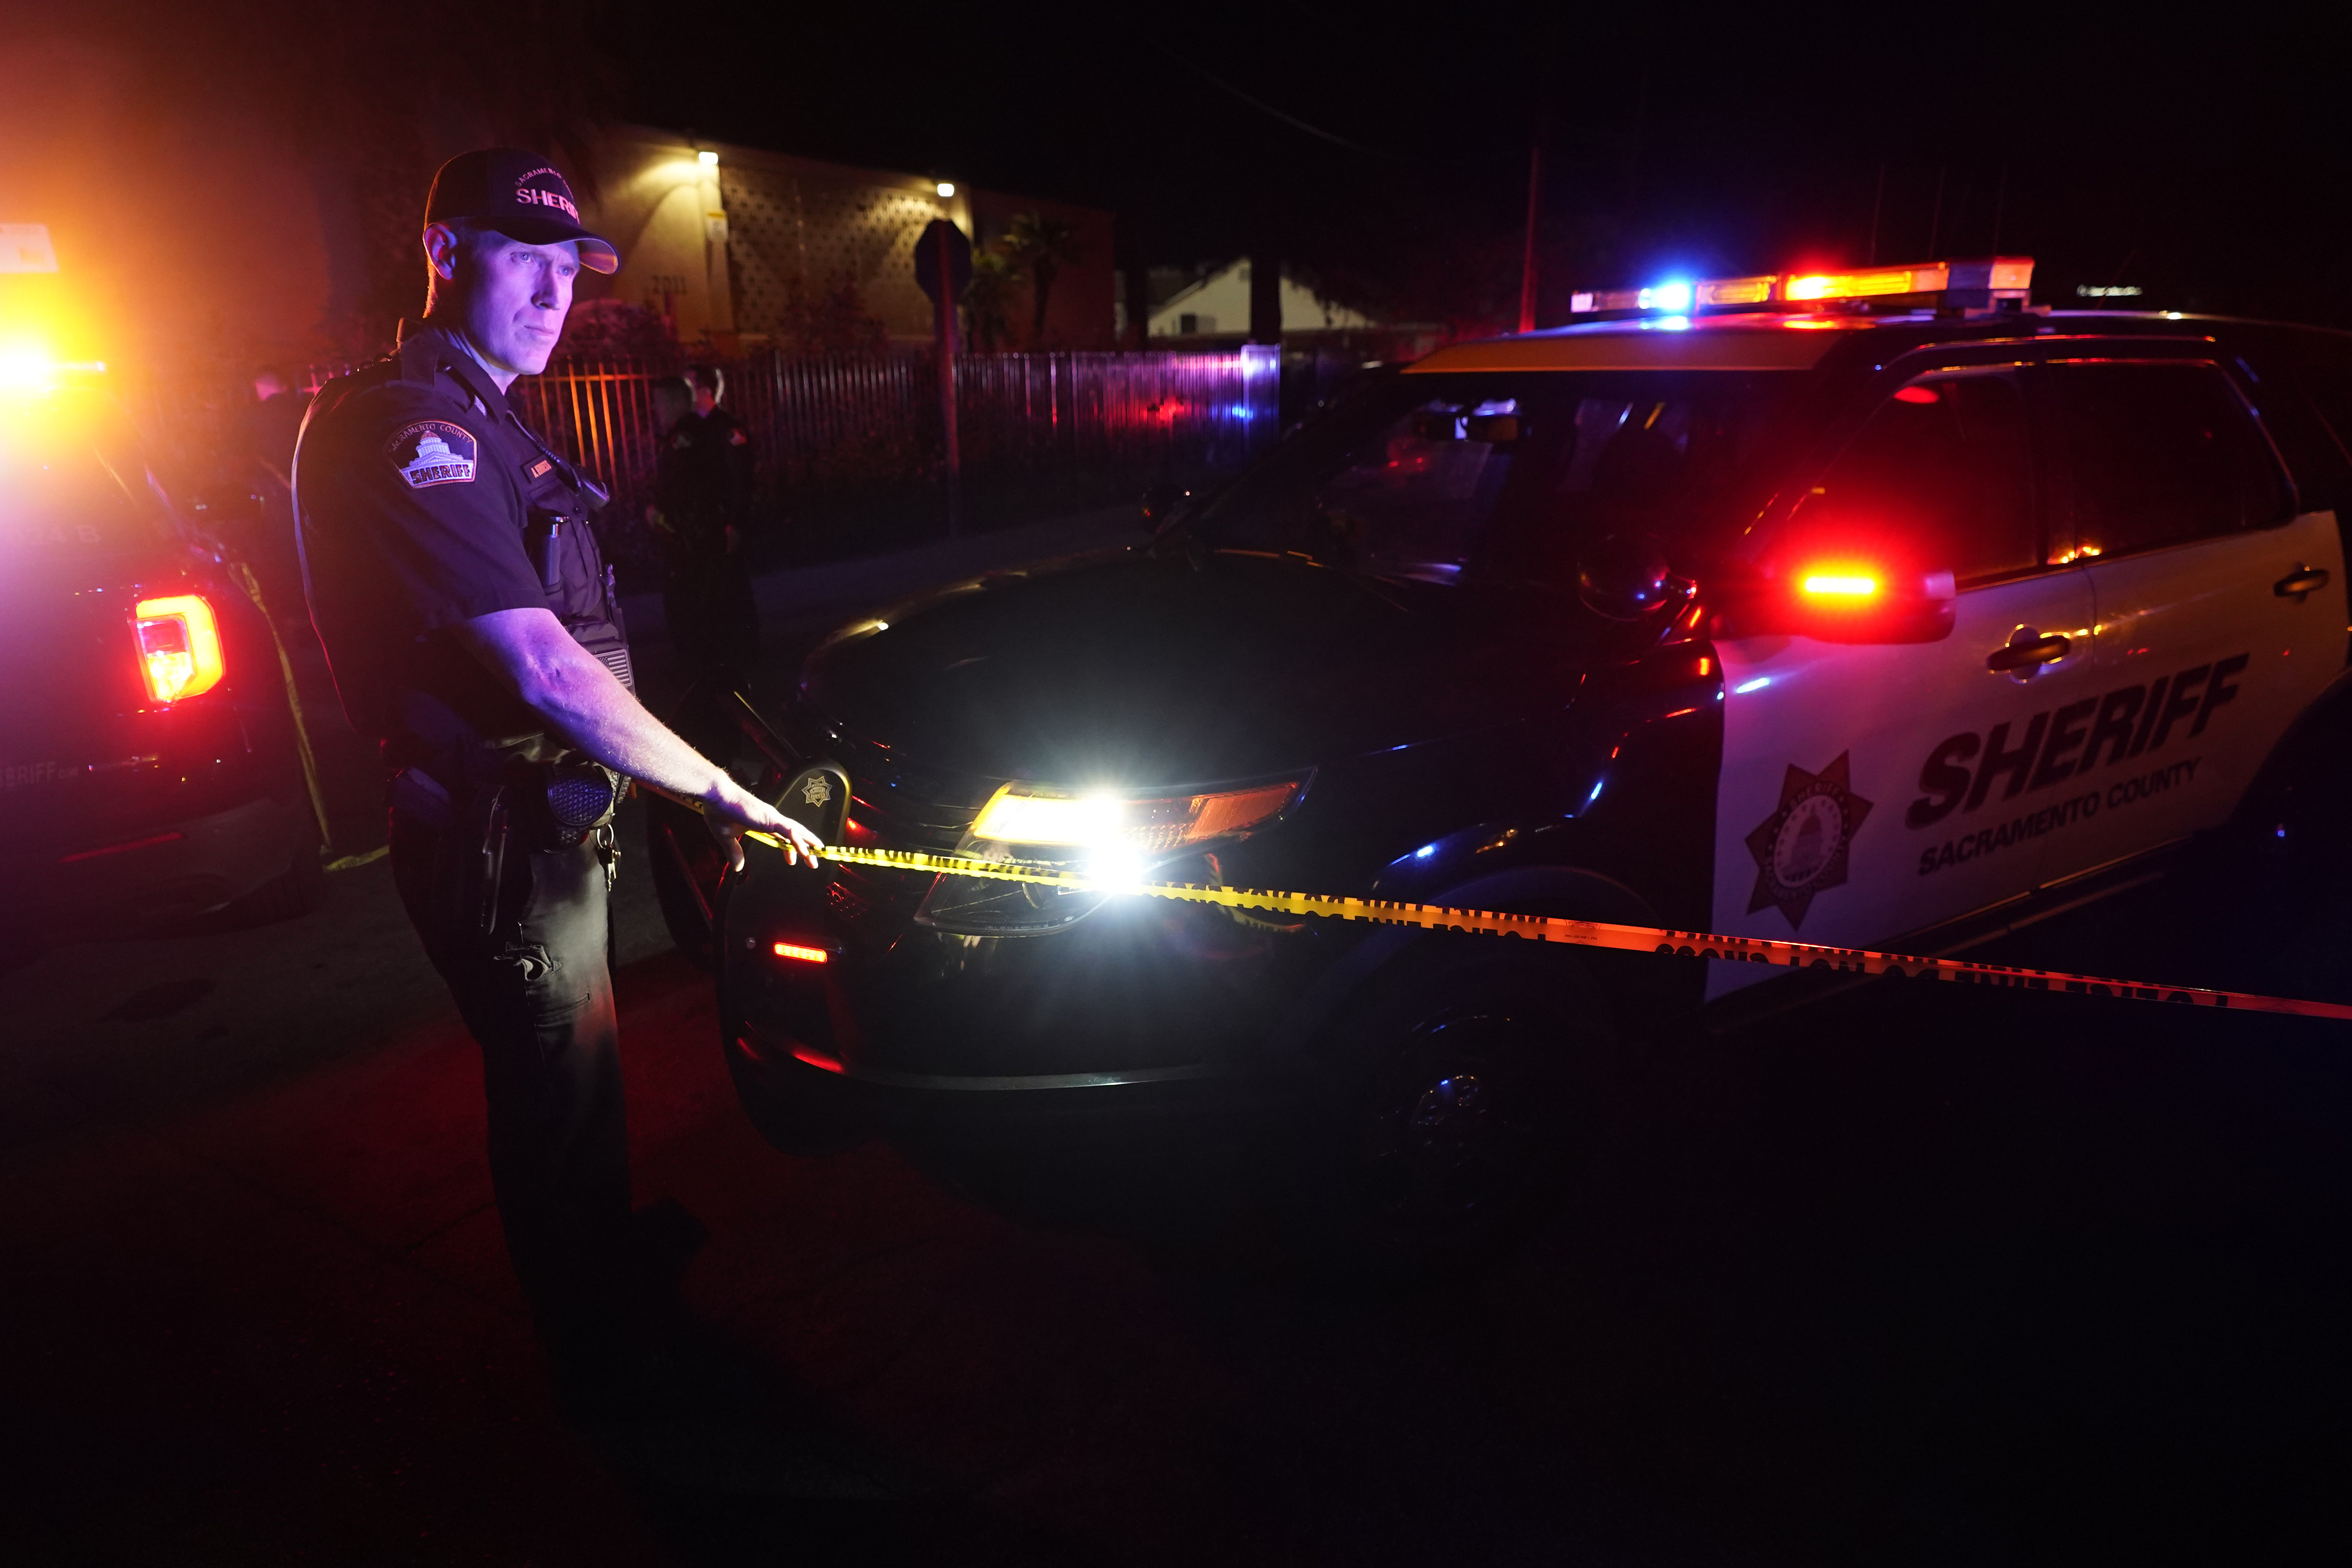 A Sacramento County Sheriff's deputy puts up police tape that blocks the street leading to a church where a fatal shooting occurred with multiple victims, in Sacramento, Calif., late Monday, Feb. 28, 2022. (AP Photo/Rich Pedroncelli)